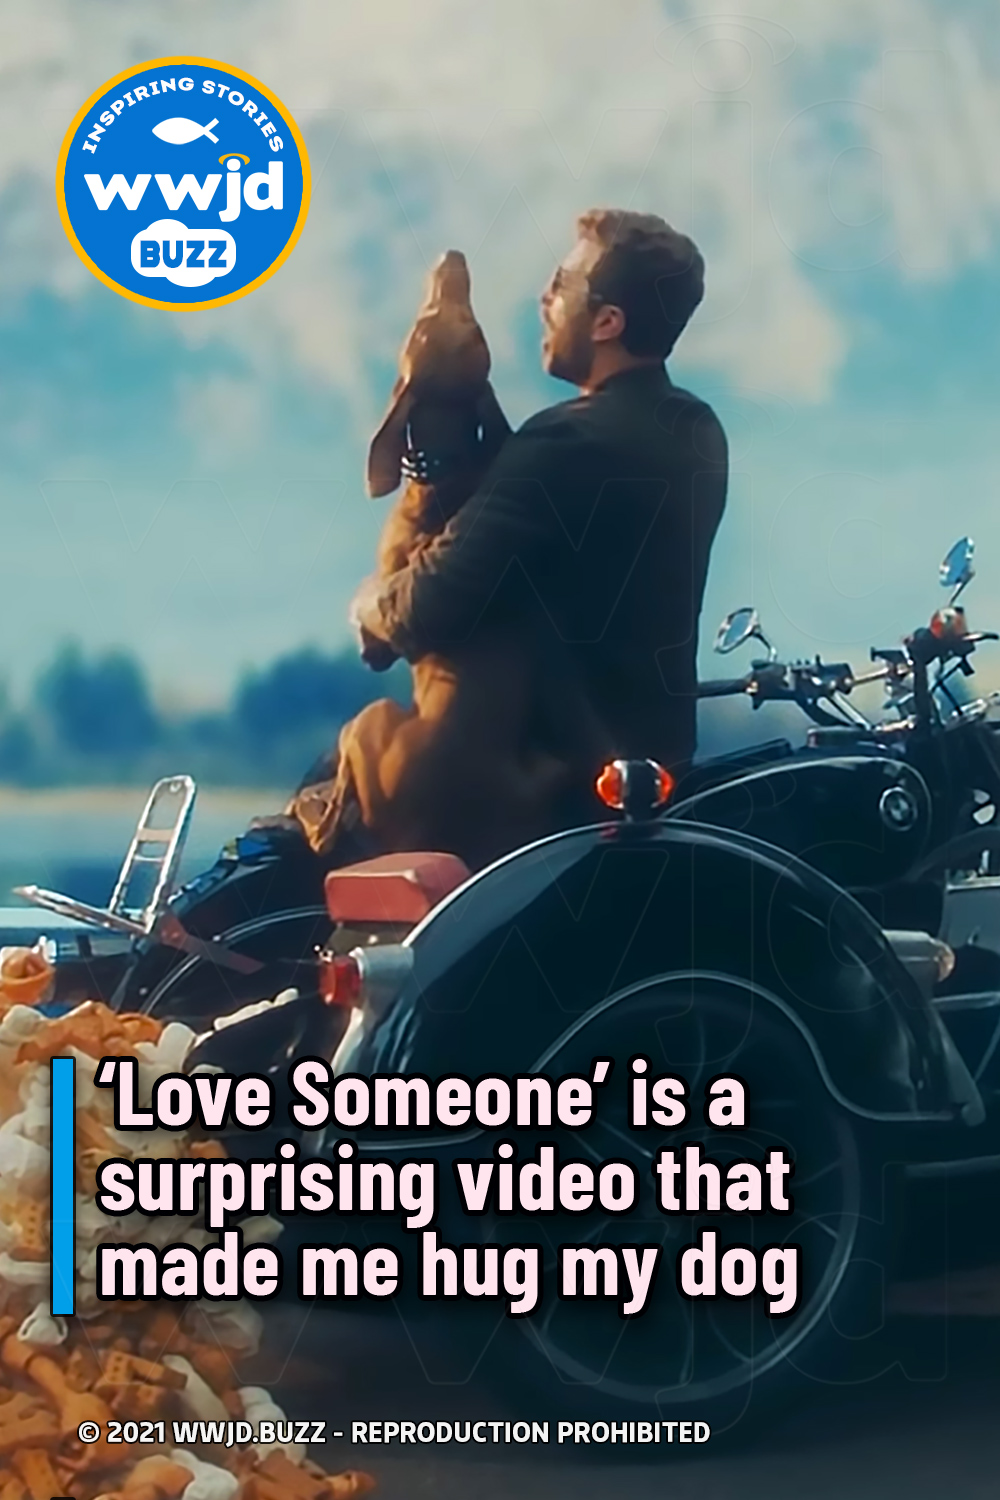 ‘Love Someone’ is a surprising video that made me hug my dog